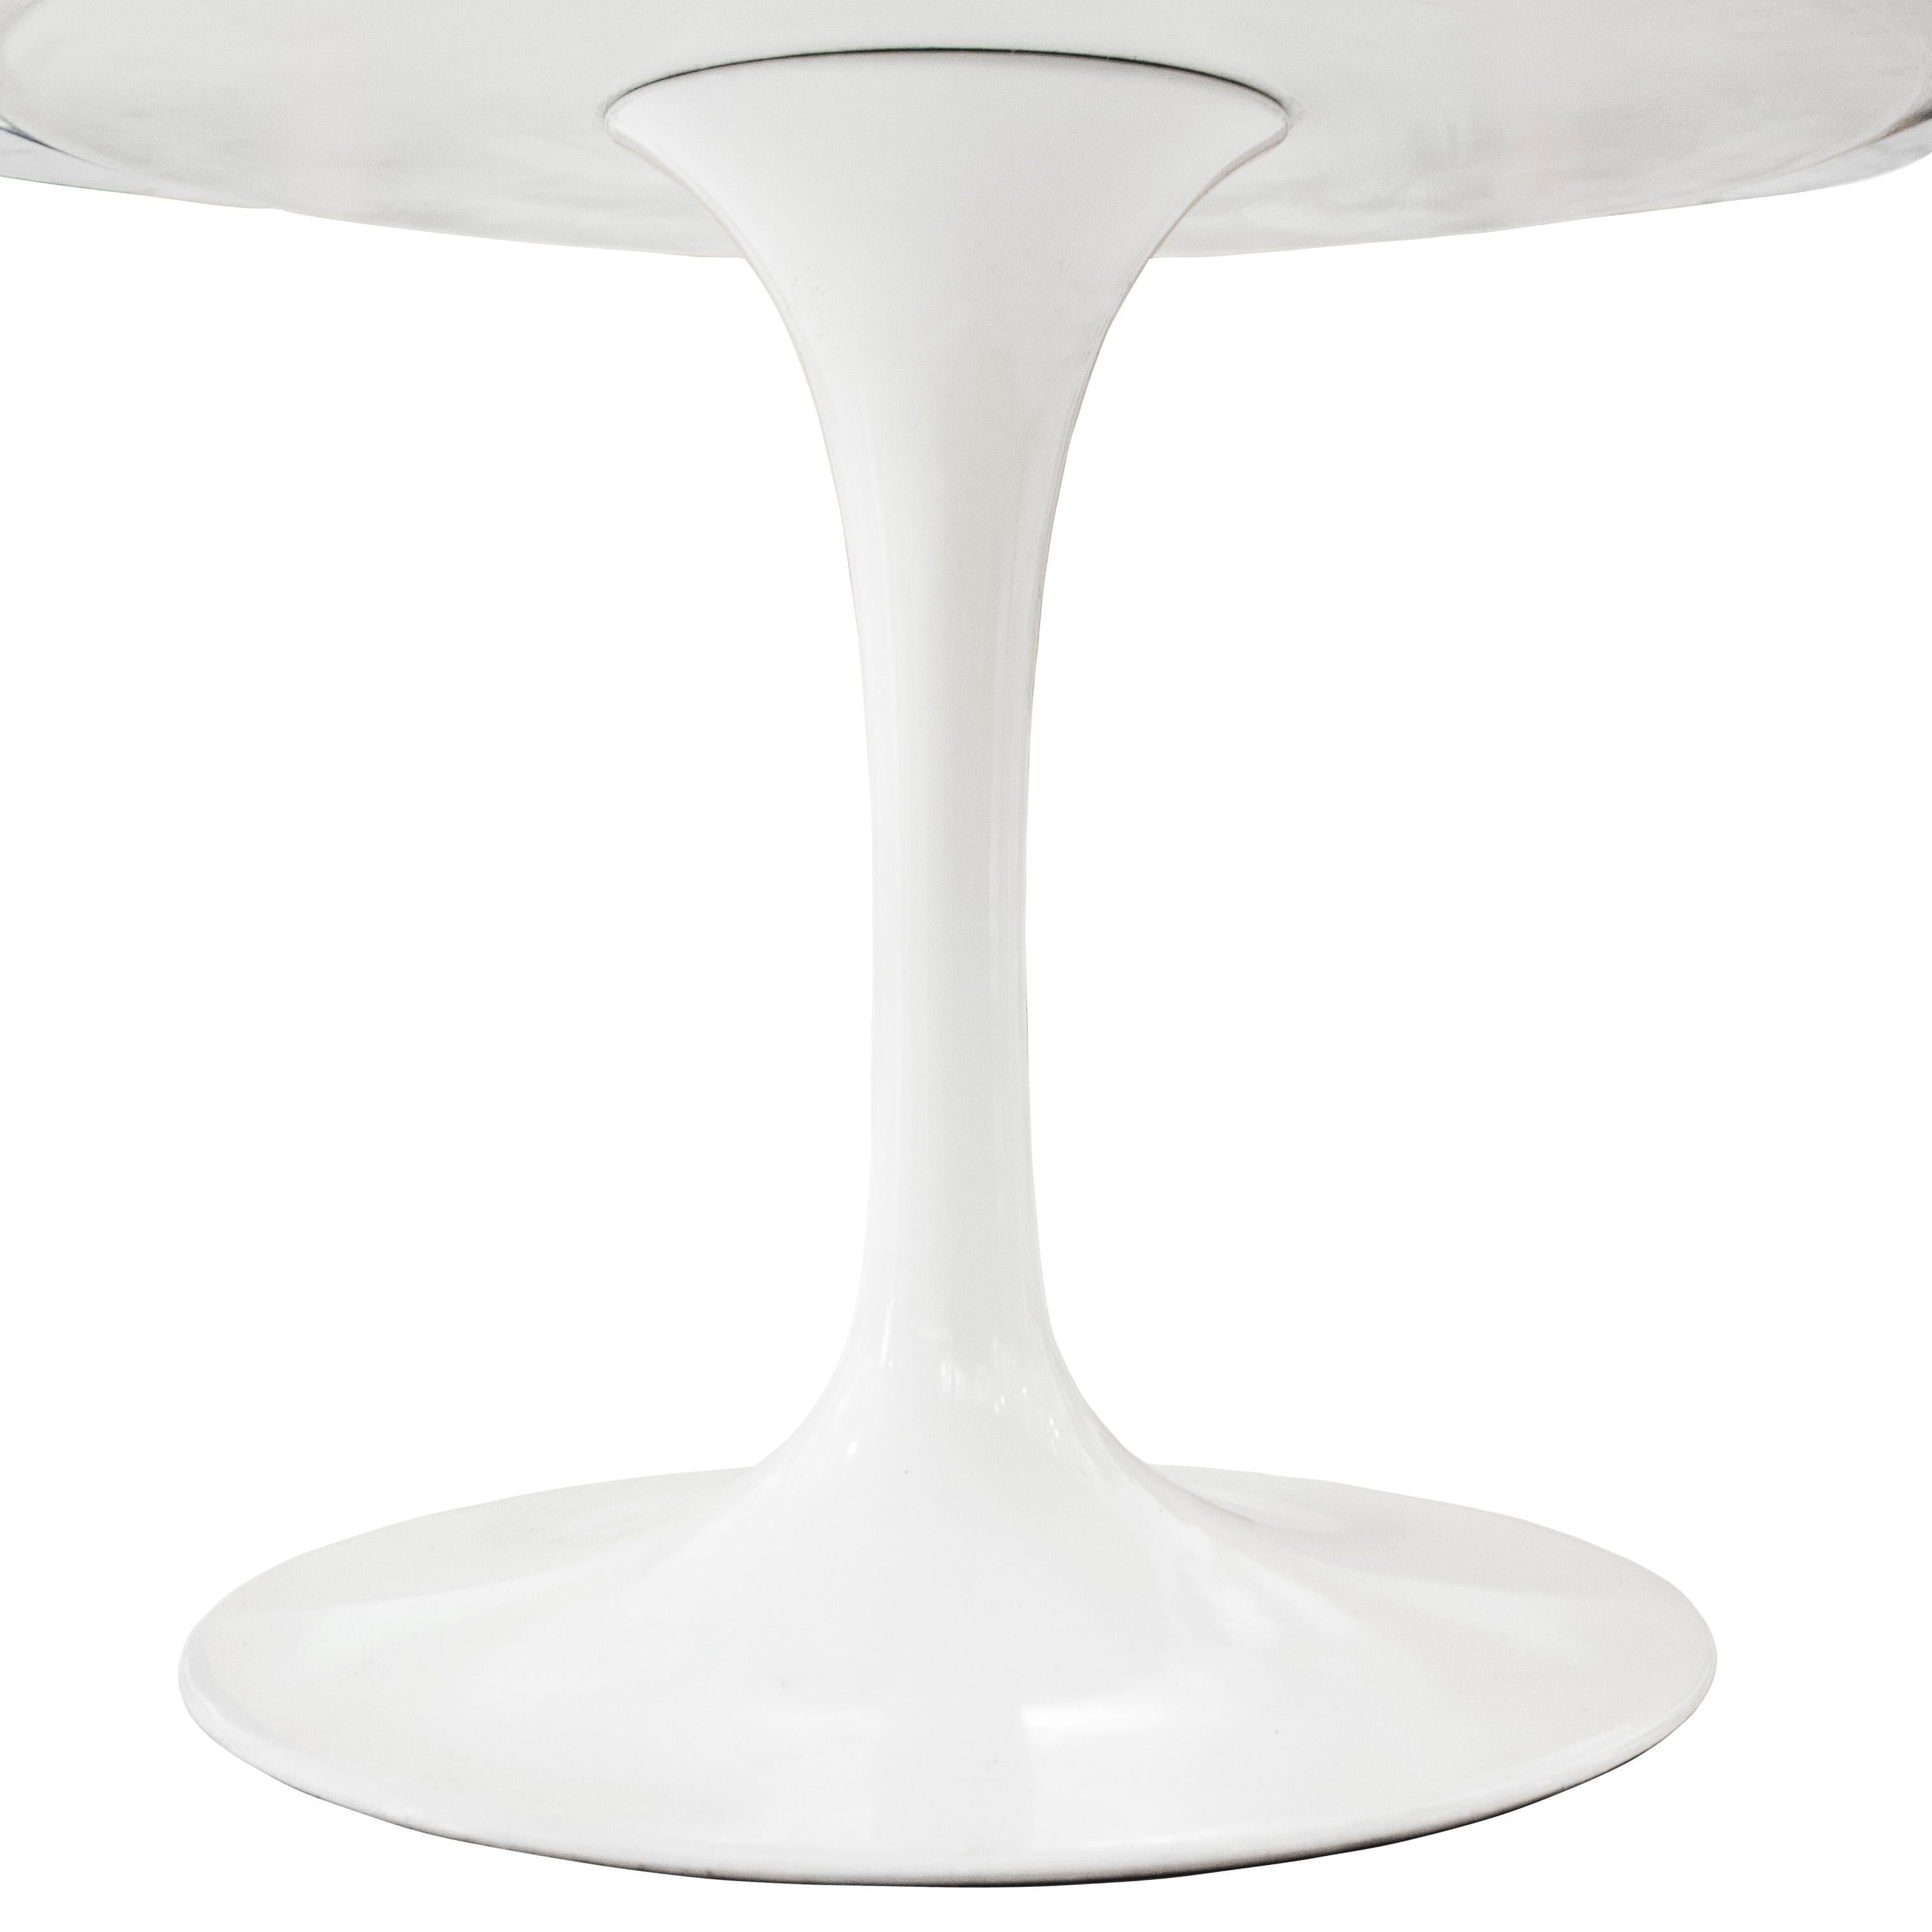 Mid-Century Modern Mini Tulip Table, Designed by Eero Saarinen and Edited by Knoll, USA, 1956 For Sale